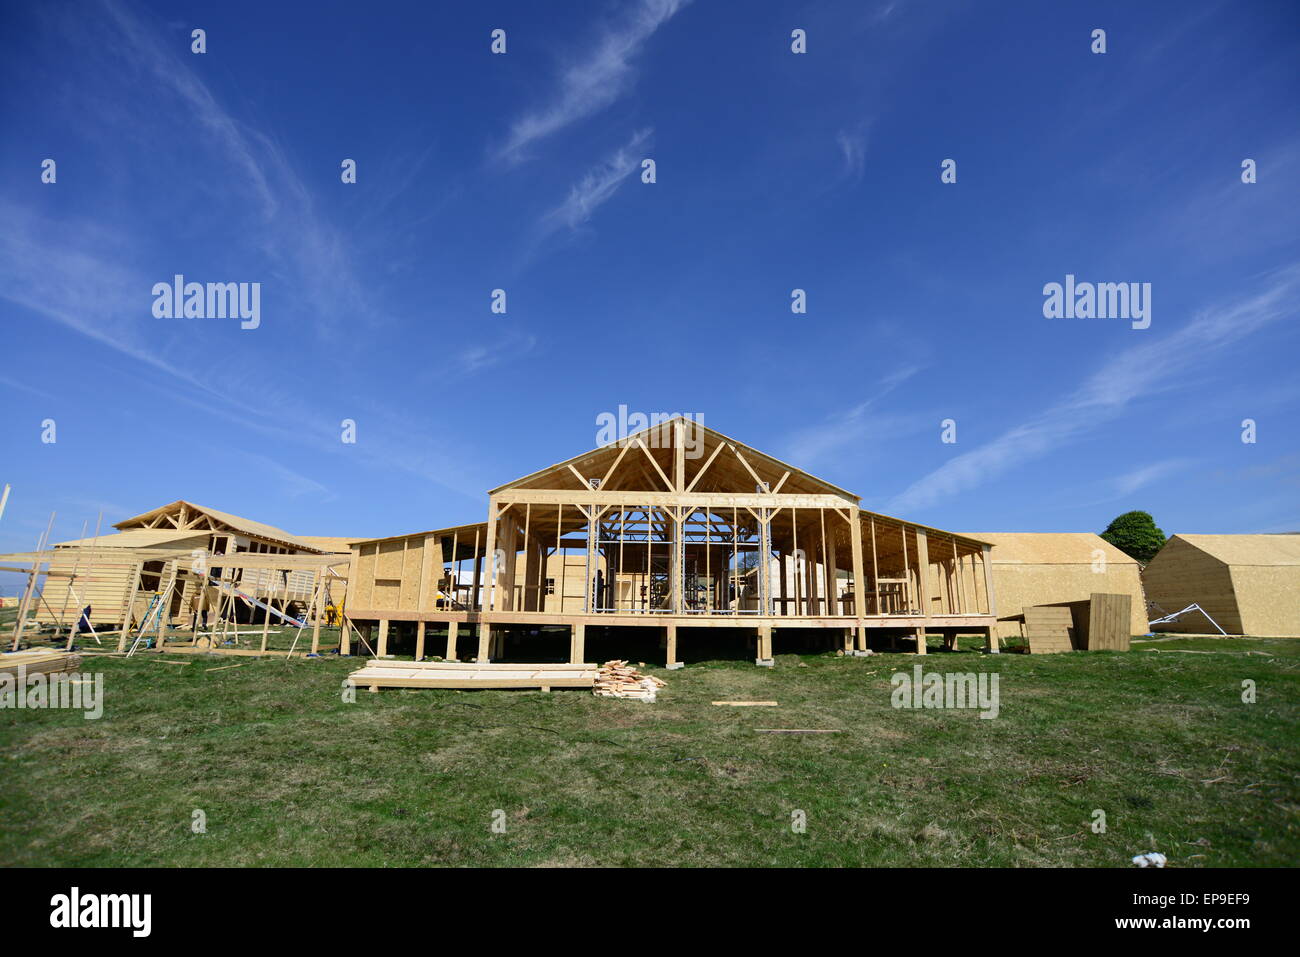 Barnsley, UK. The film set which is currently being built for new ITV drama 'Jericho'. Picture: Scott Bairstow/Alamy Stock Photo